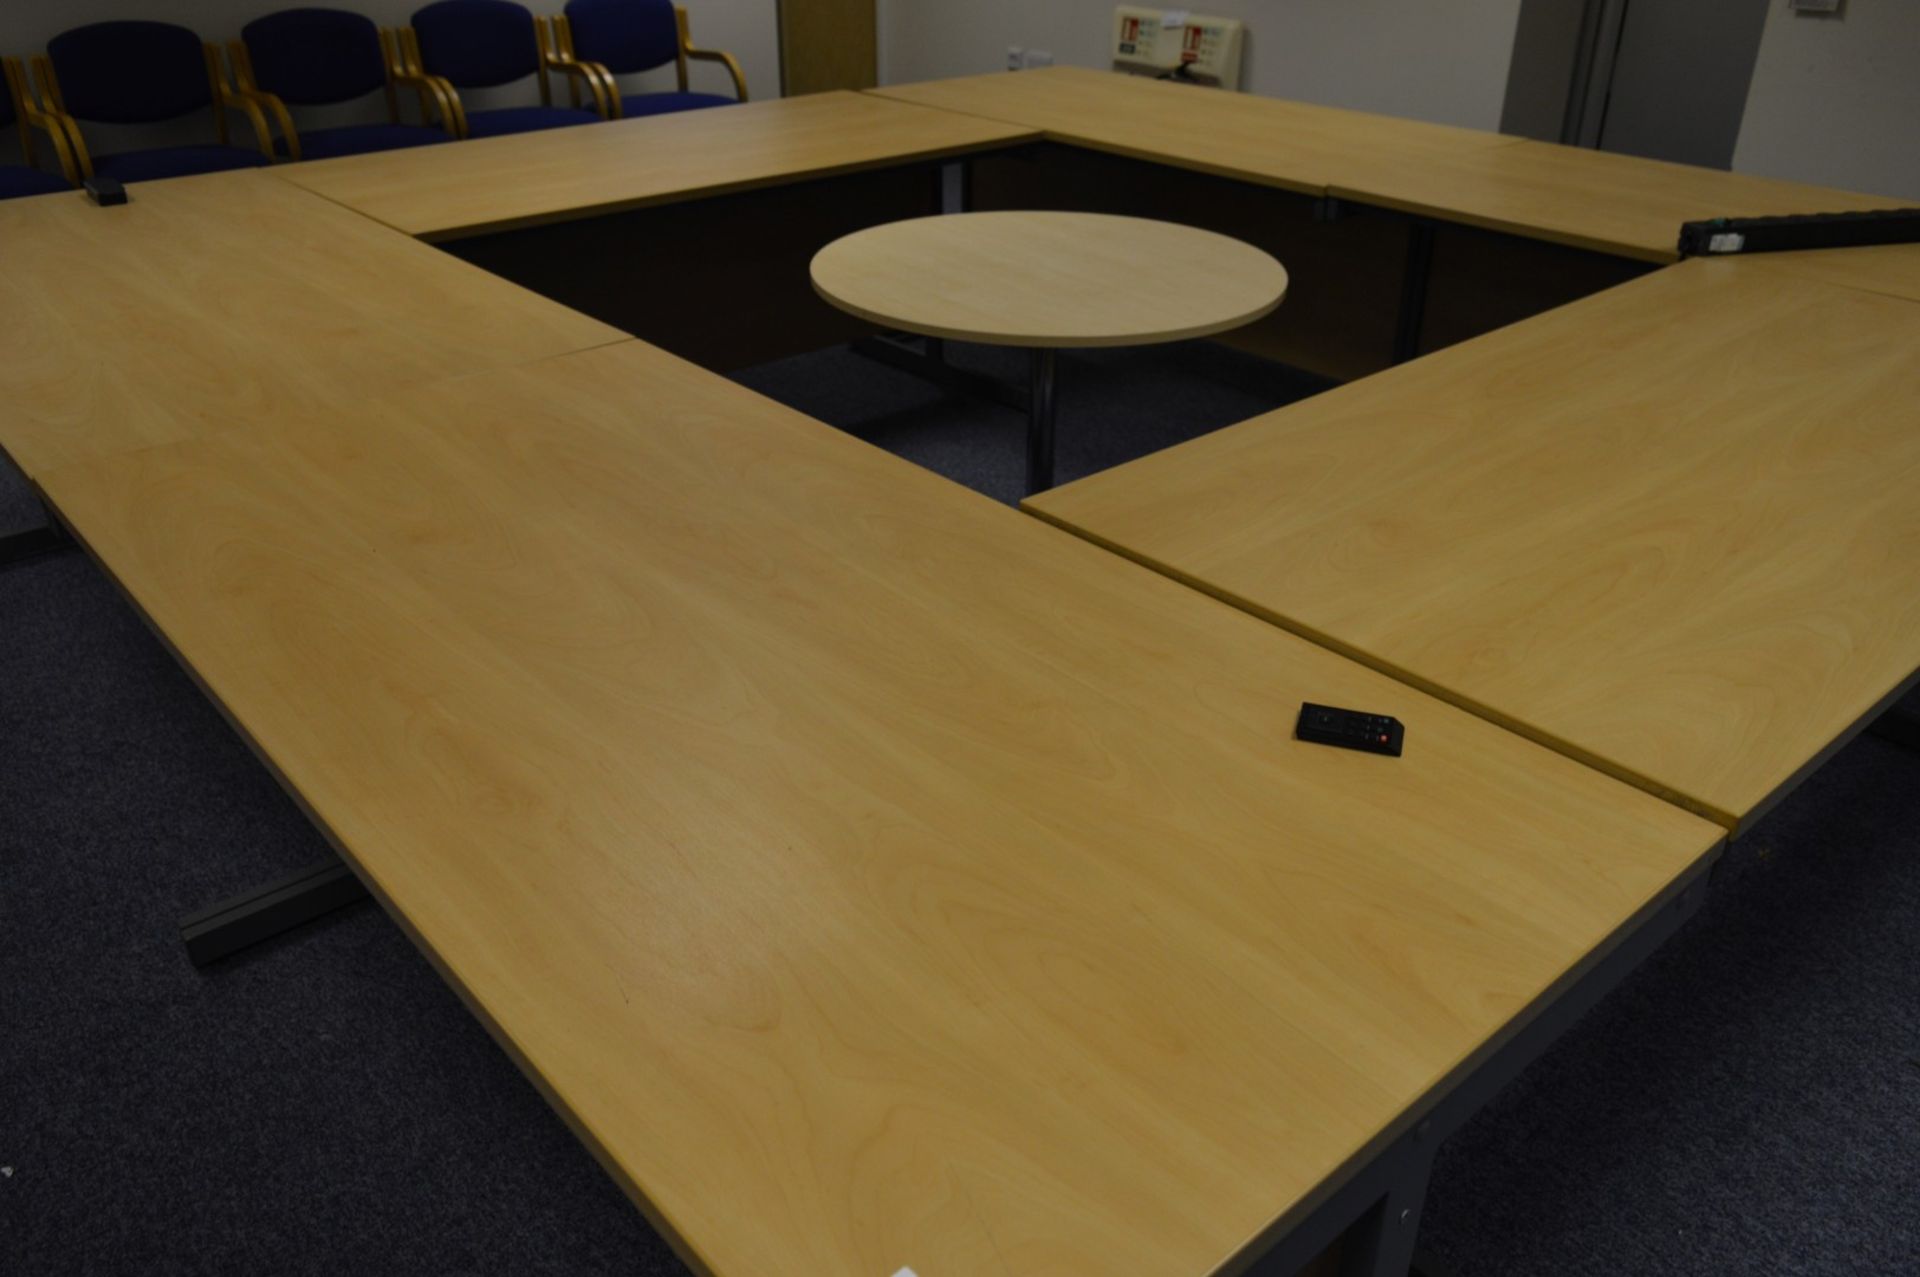 6 x Large Office Desks Plus Small Circular Meeting Table - H73 x W160 x D80 cms - Premium Quality - Image 5 of 5